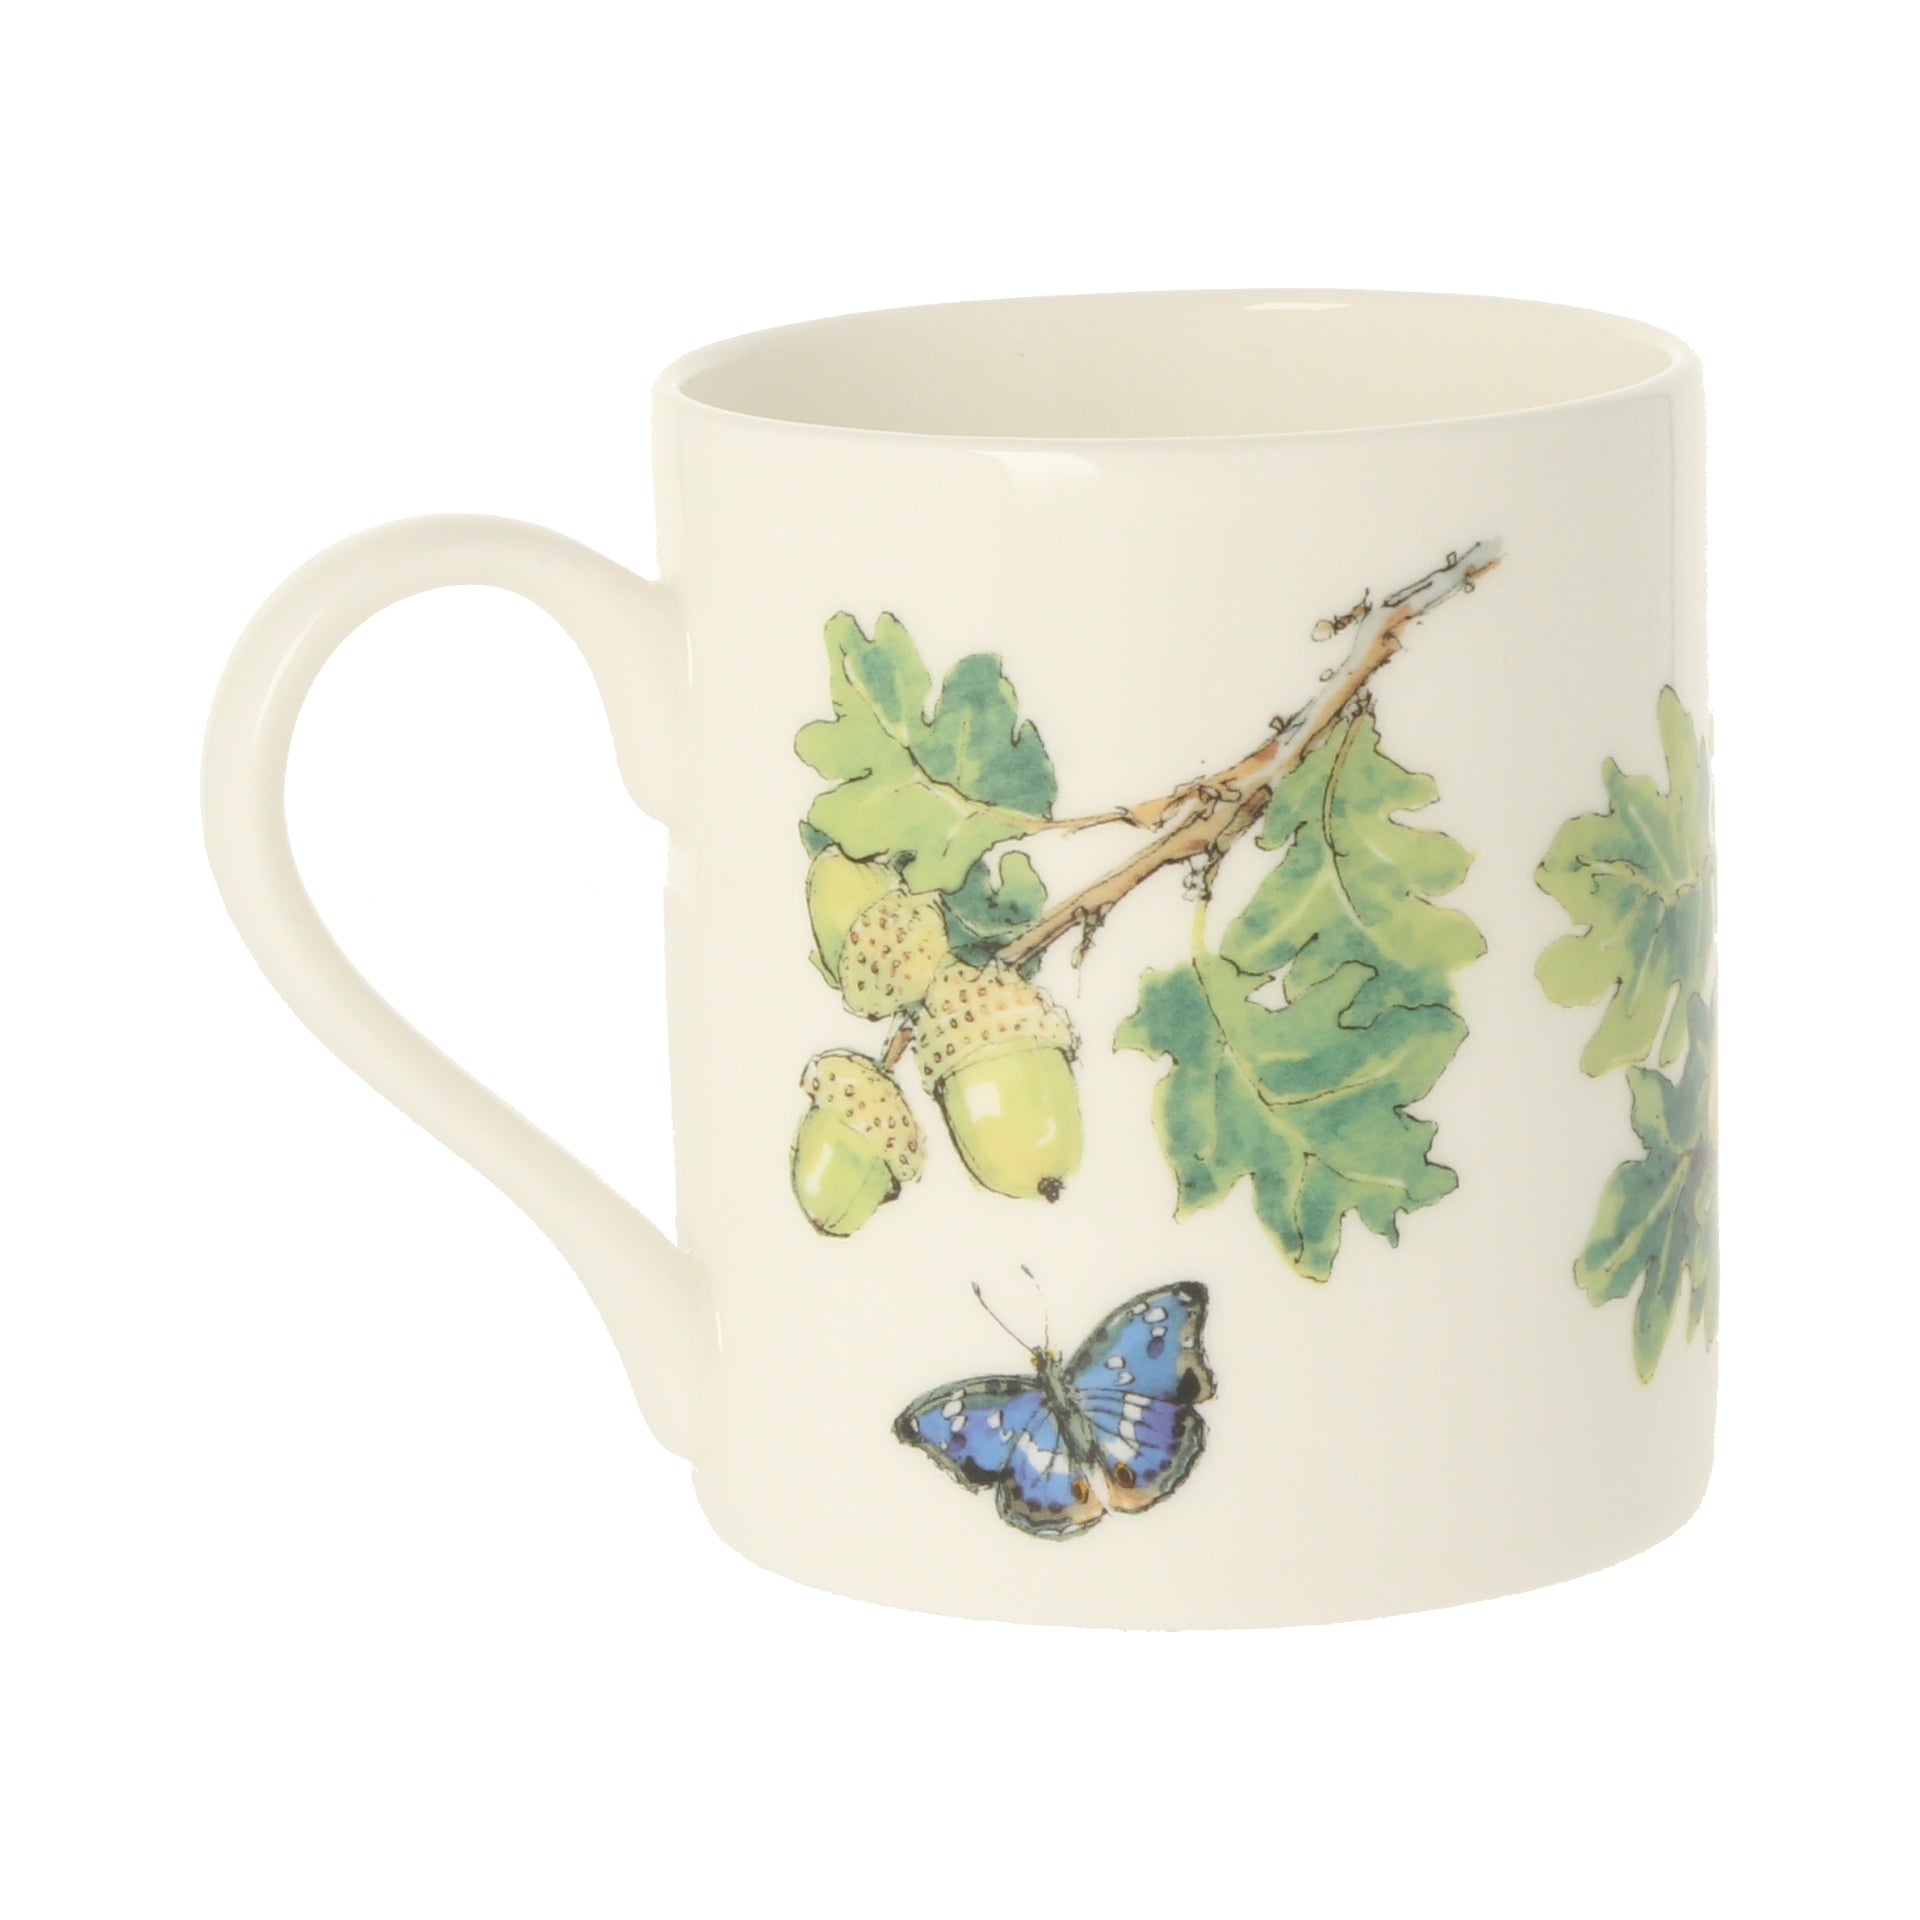 Out In The Fields English Oak Mug